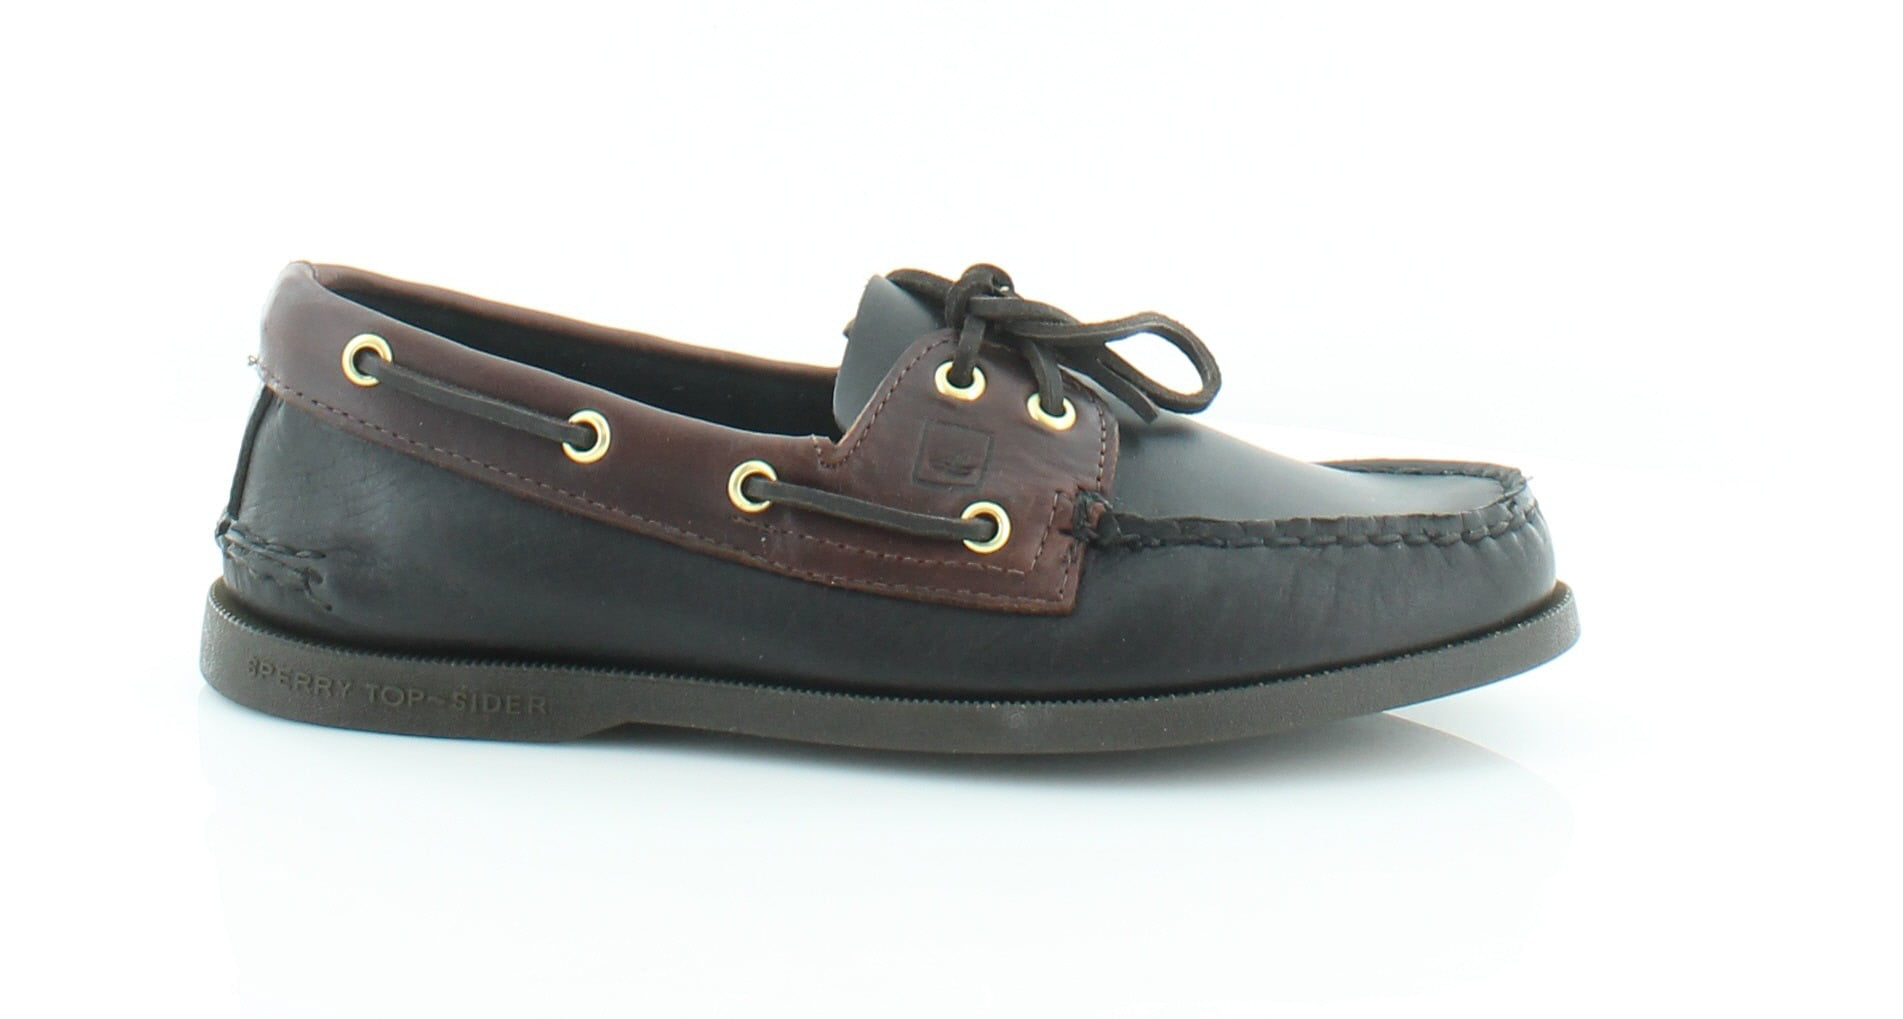 classic sperry top sider